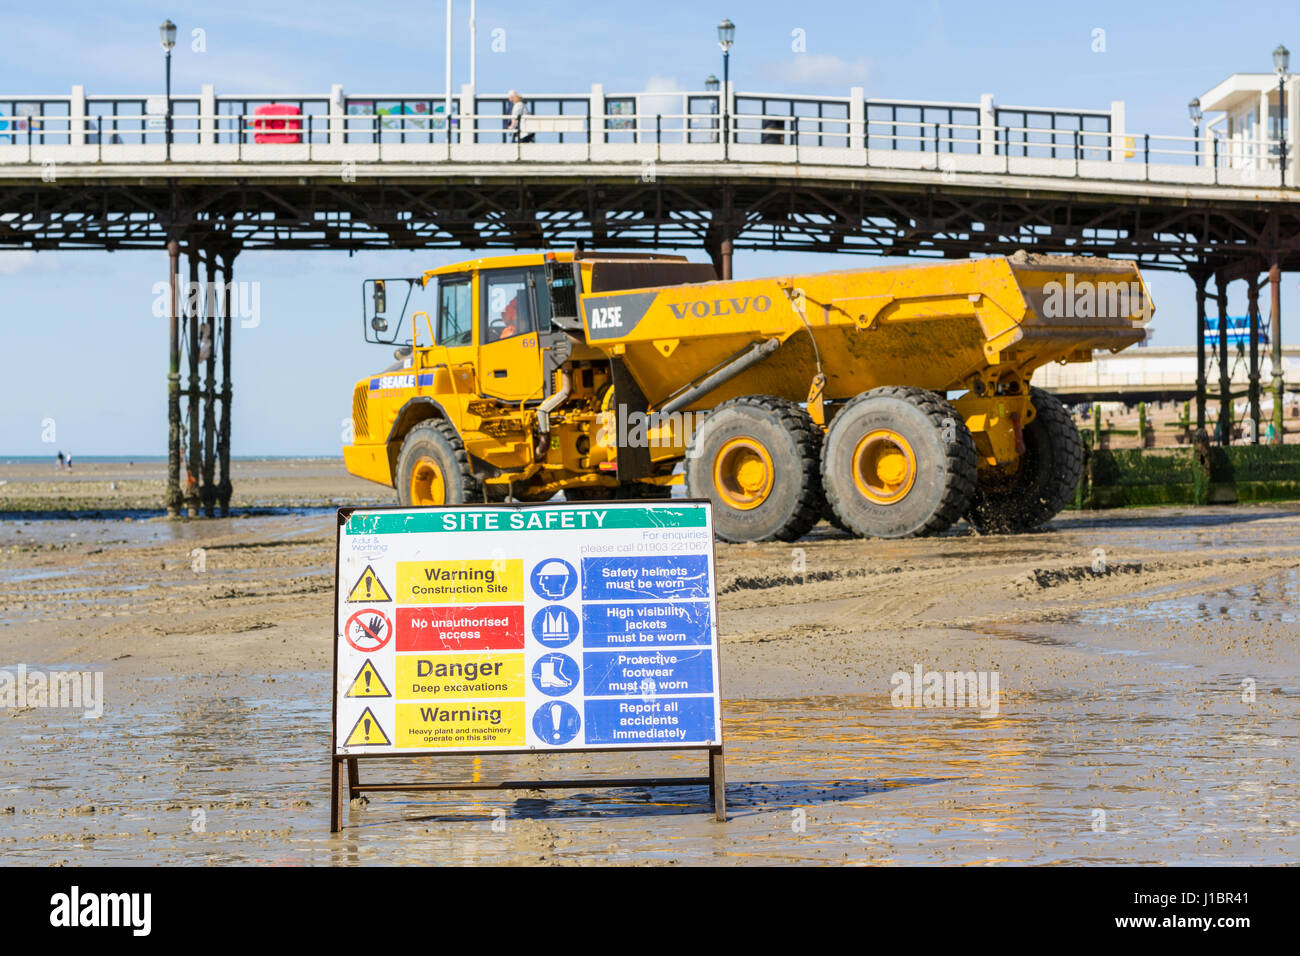 Site Safety sign at construction site on a beach. Volvo A25E Articulated Hauler moving shingle on Worthing Beach, Worthing, West Sussex, England, UK. Stock Photo